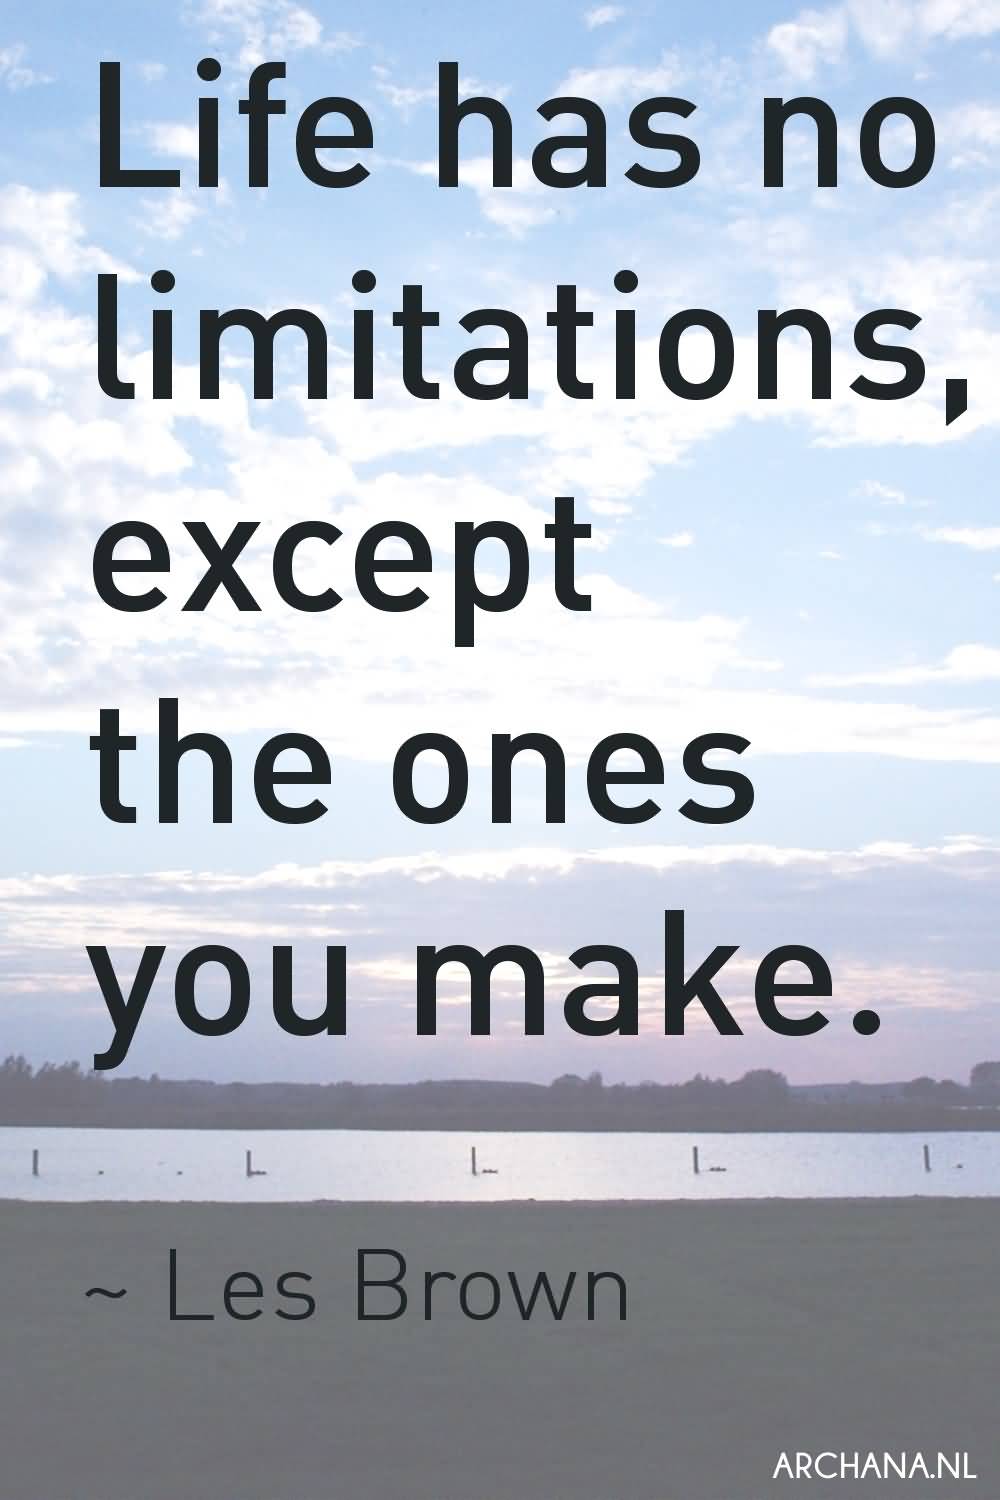 Life has no limitations, except the ones you make. Les Brown